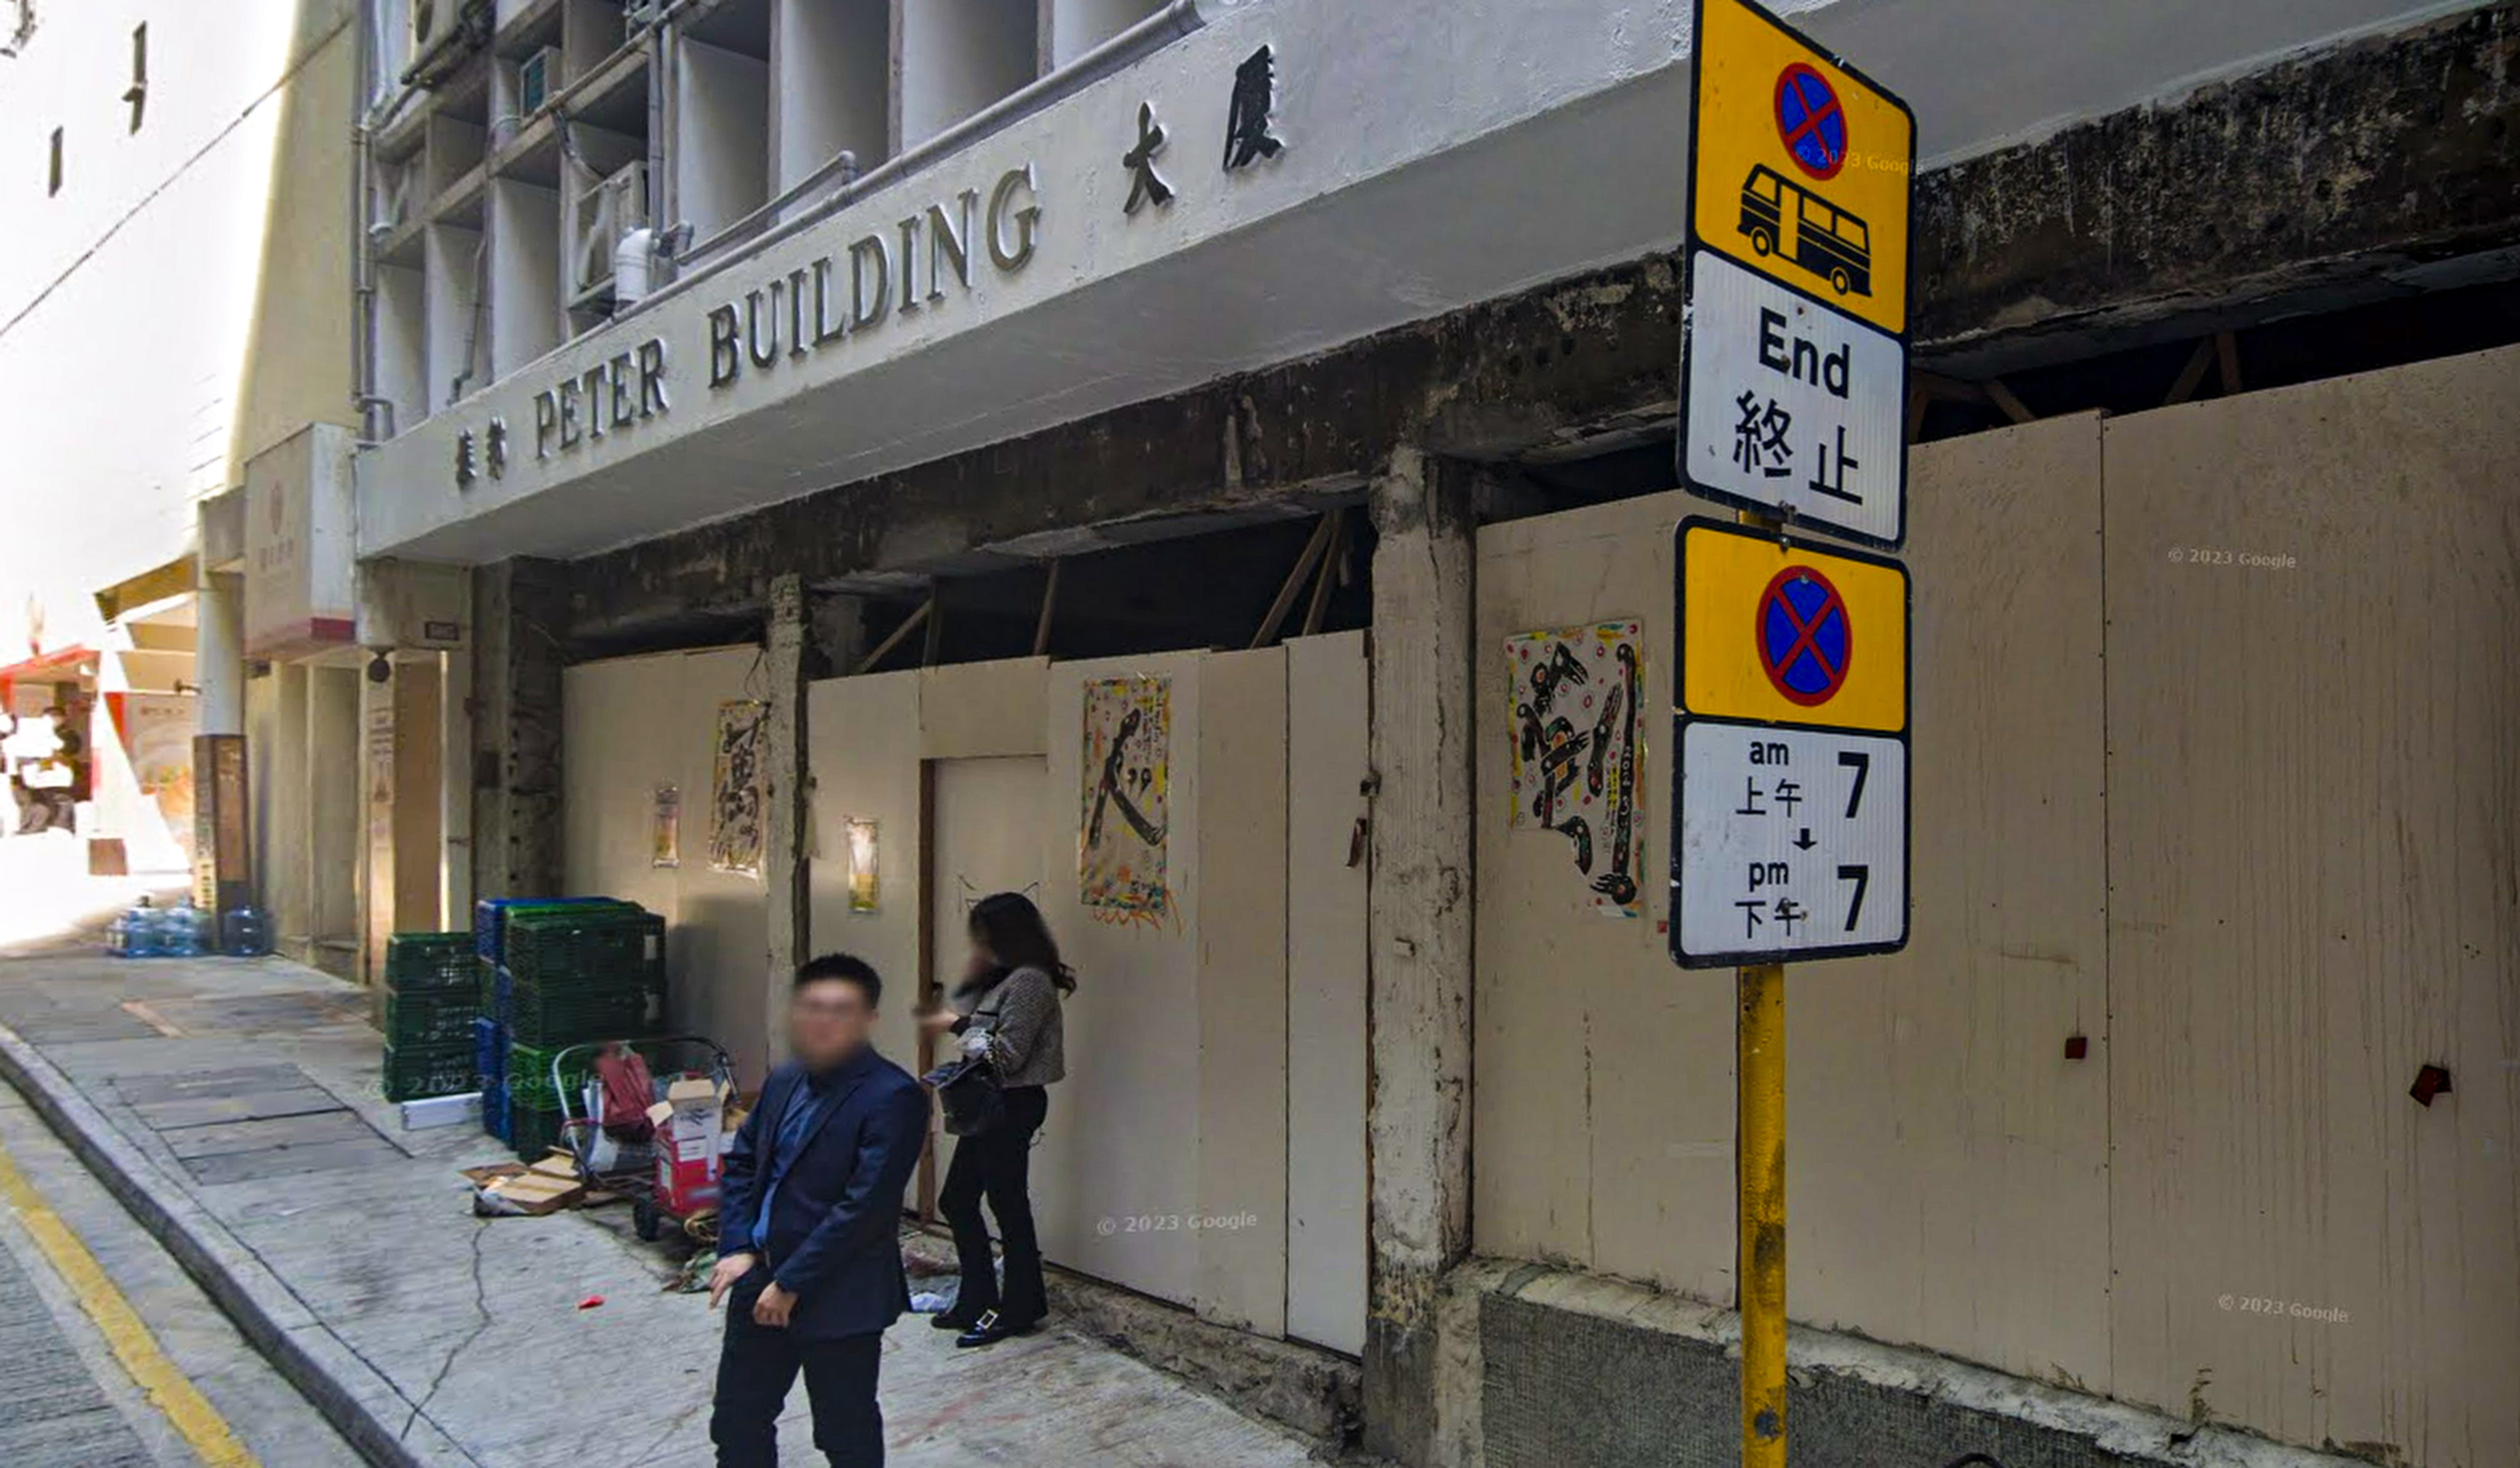 Peking Hotpot, a mainland Chinese restaurant chain, has leased nearly 6,000 sq ft of space on the ground floor of Peter Building on Queen’s Road, Central. Photo: Google Maps